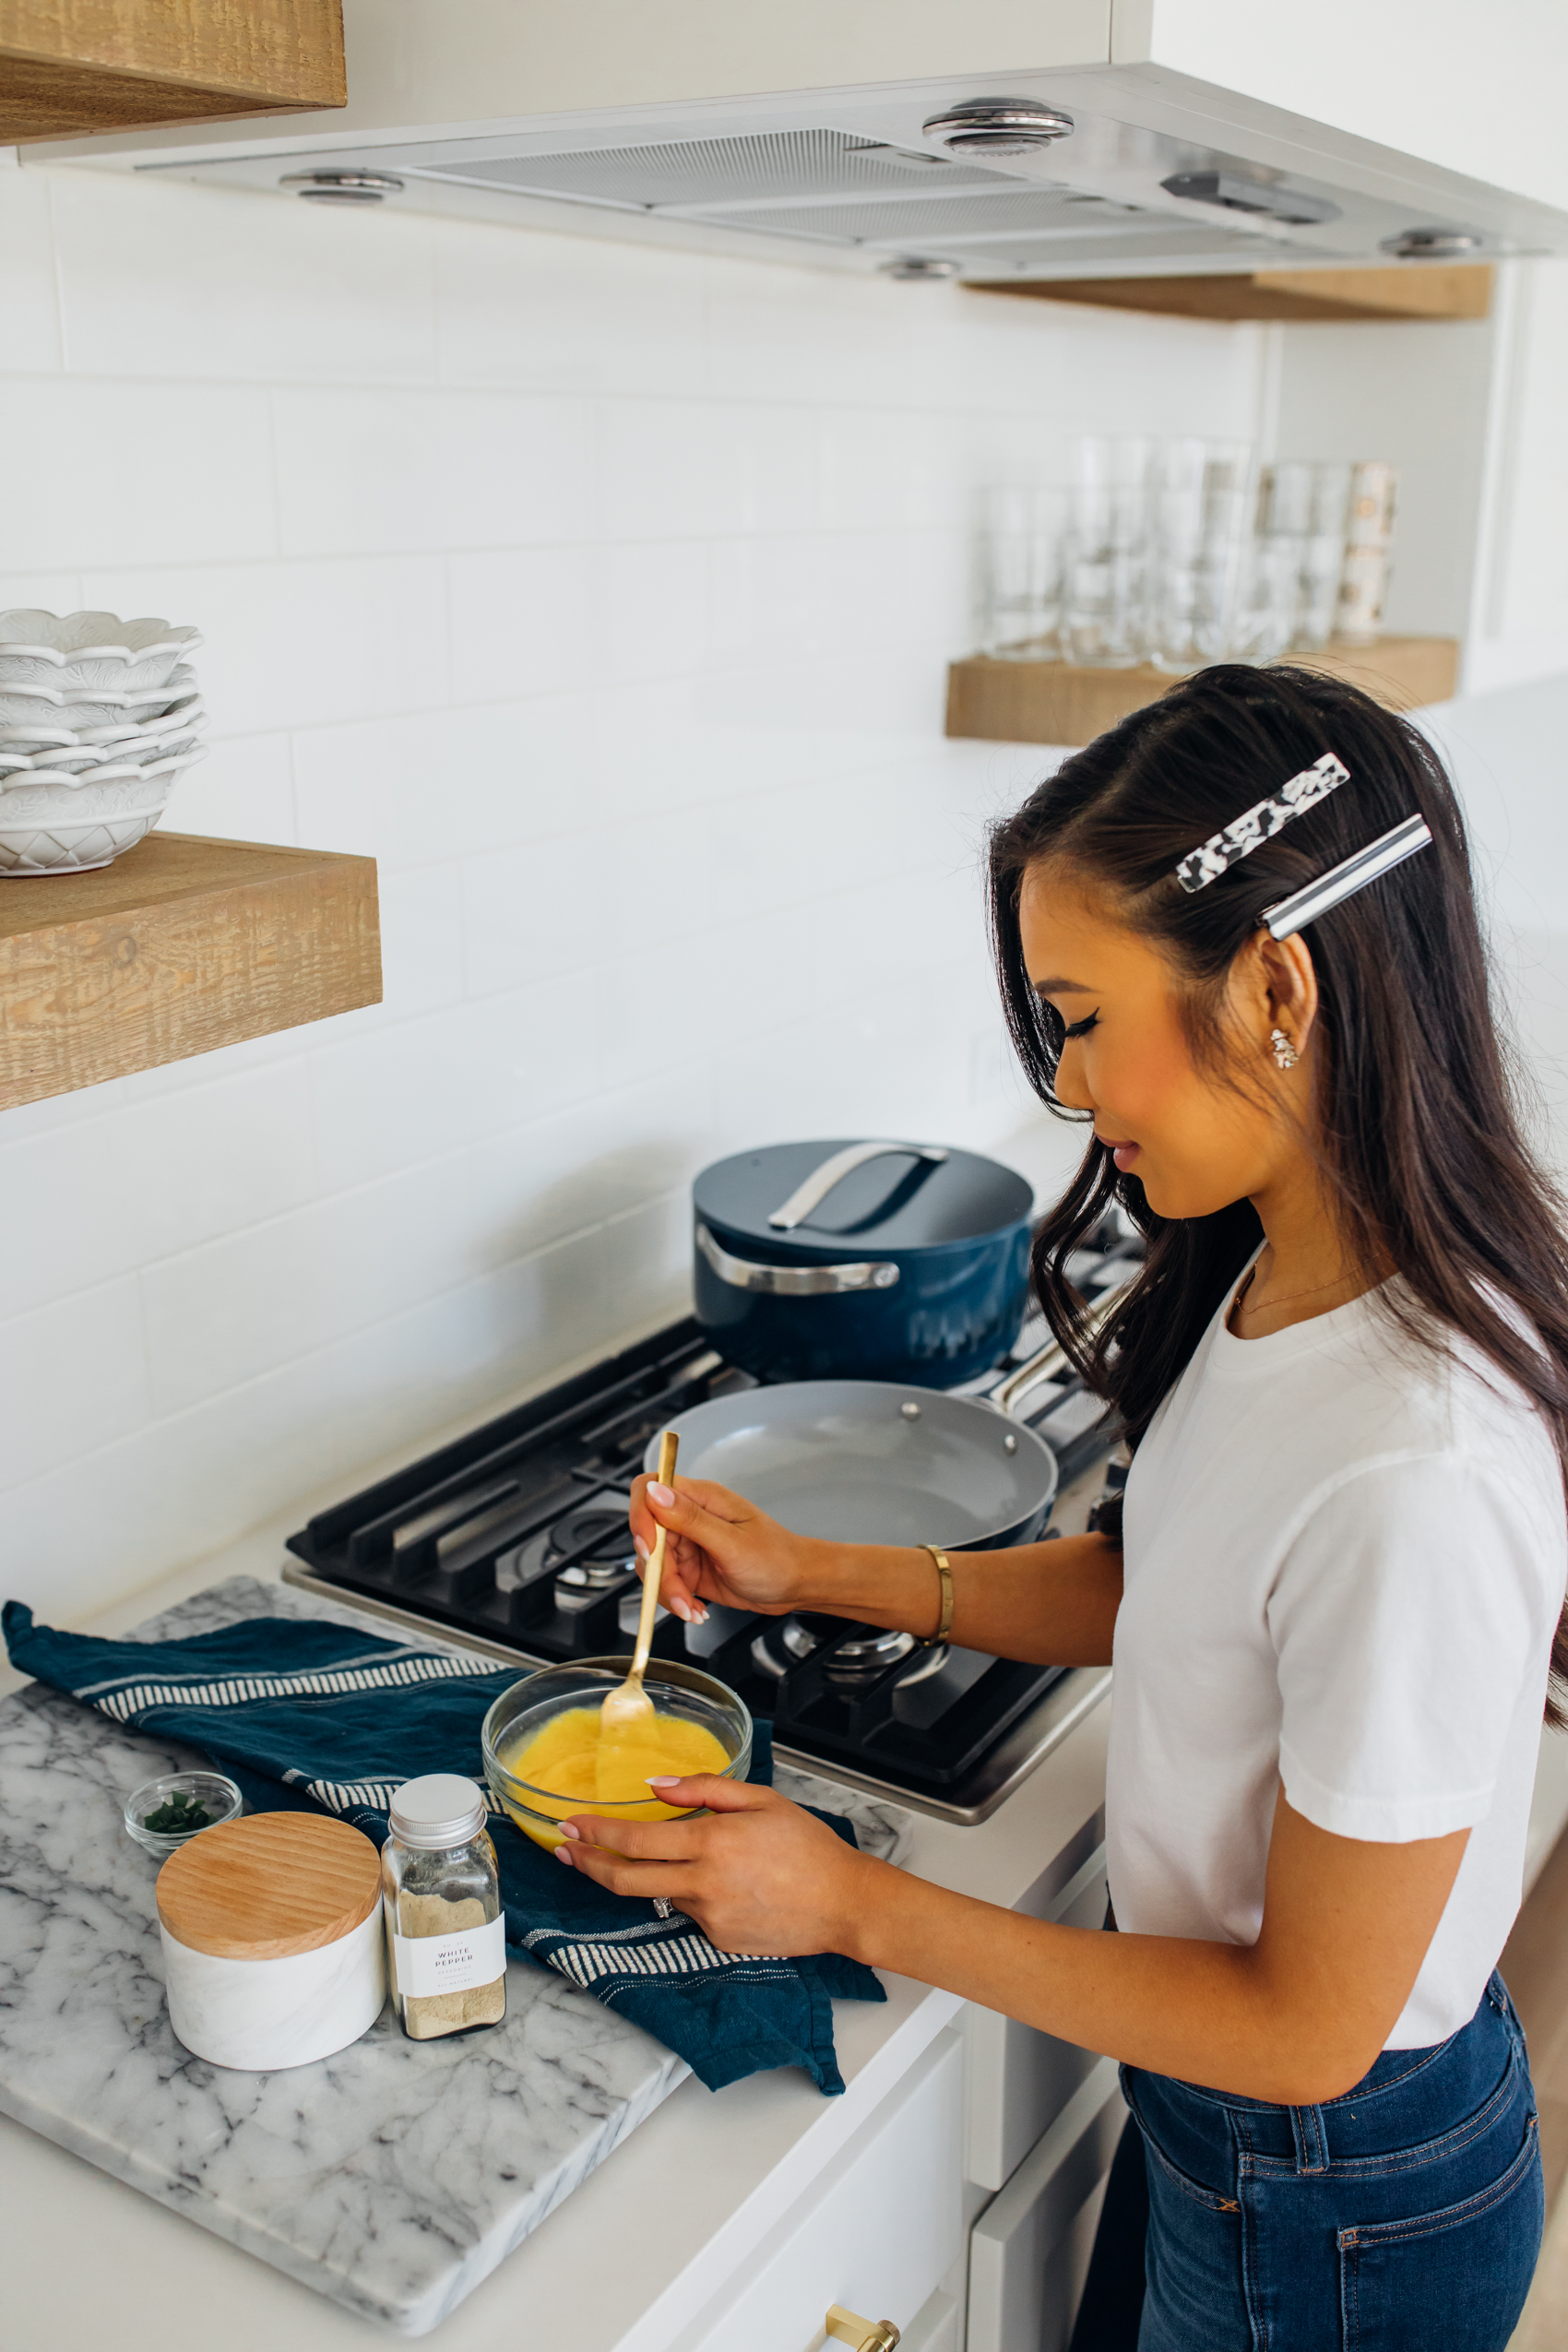 Caraway Cookware, a ceramic coated nontoxic cookware company, in a white kitchen with gas cooktop